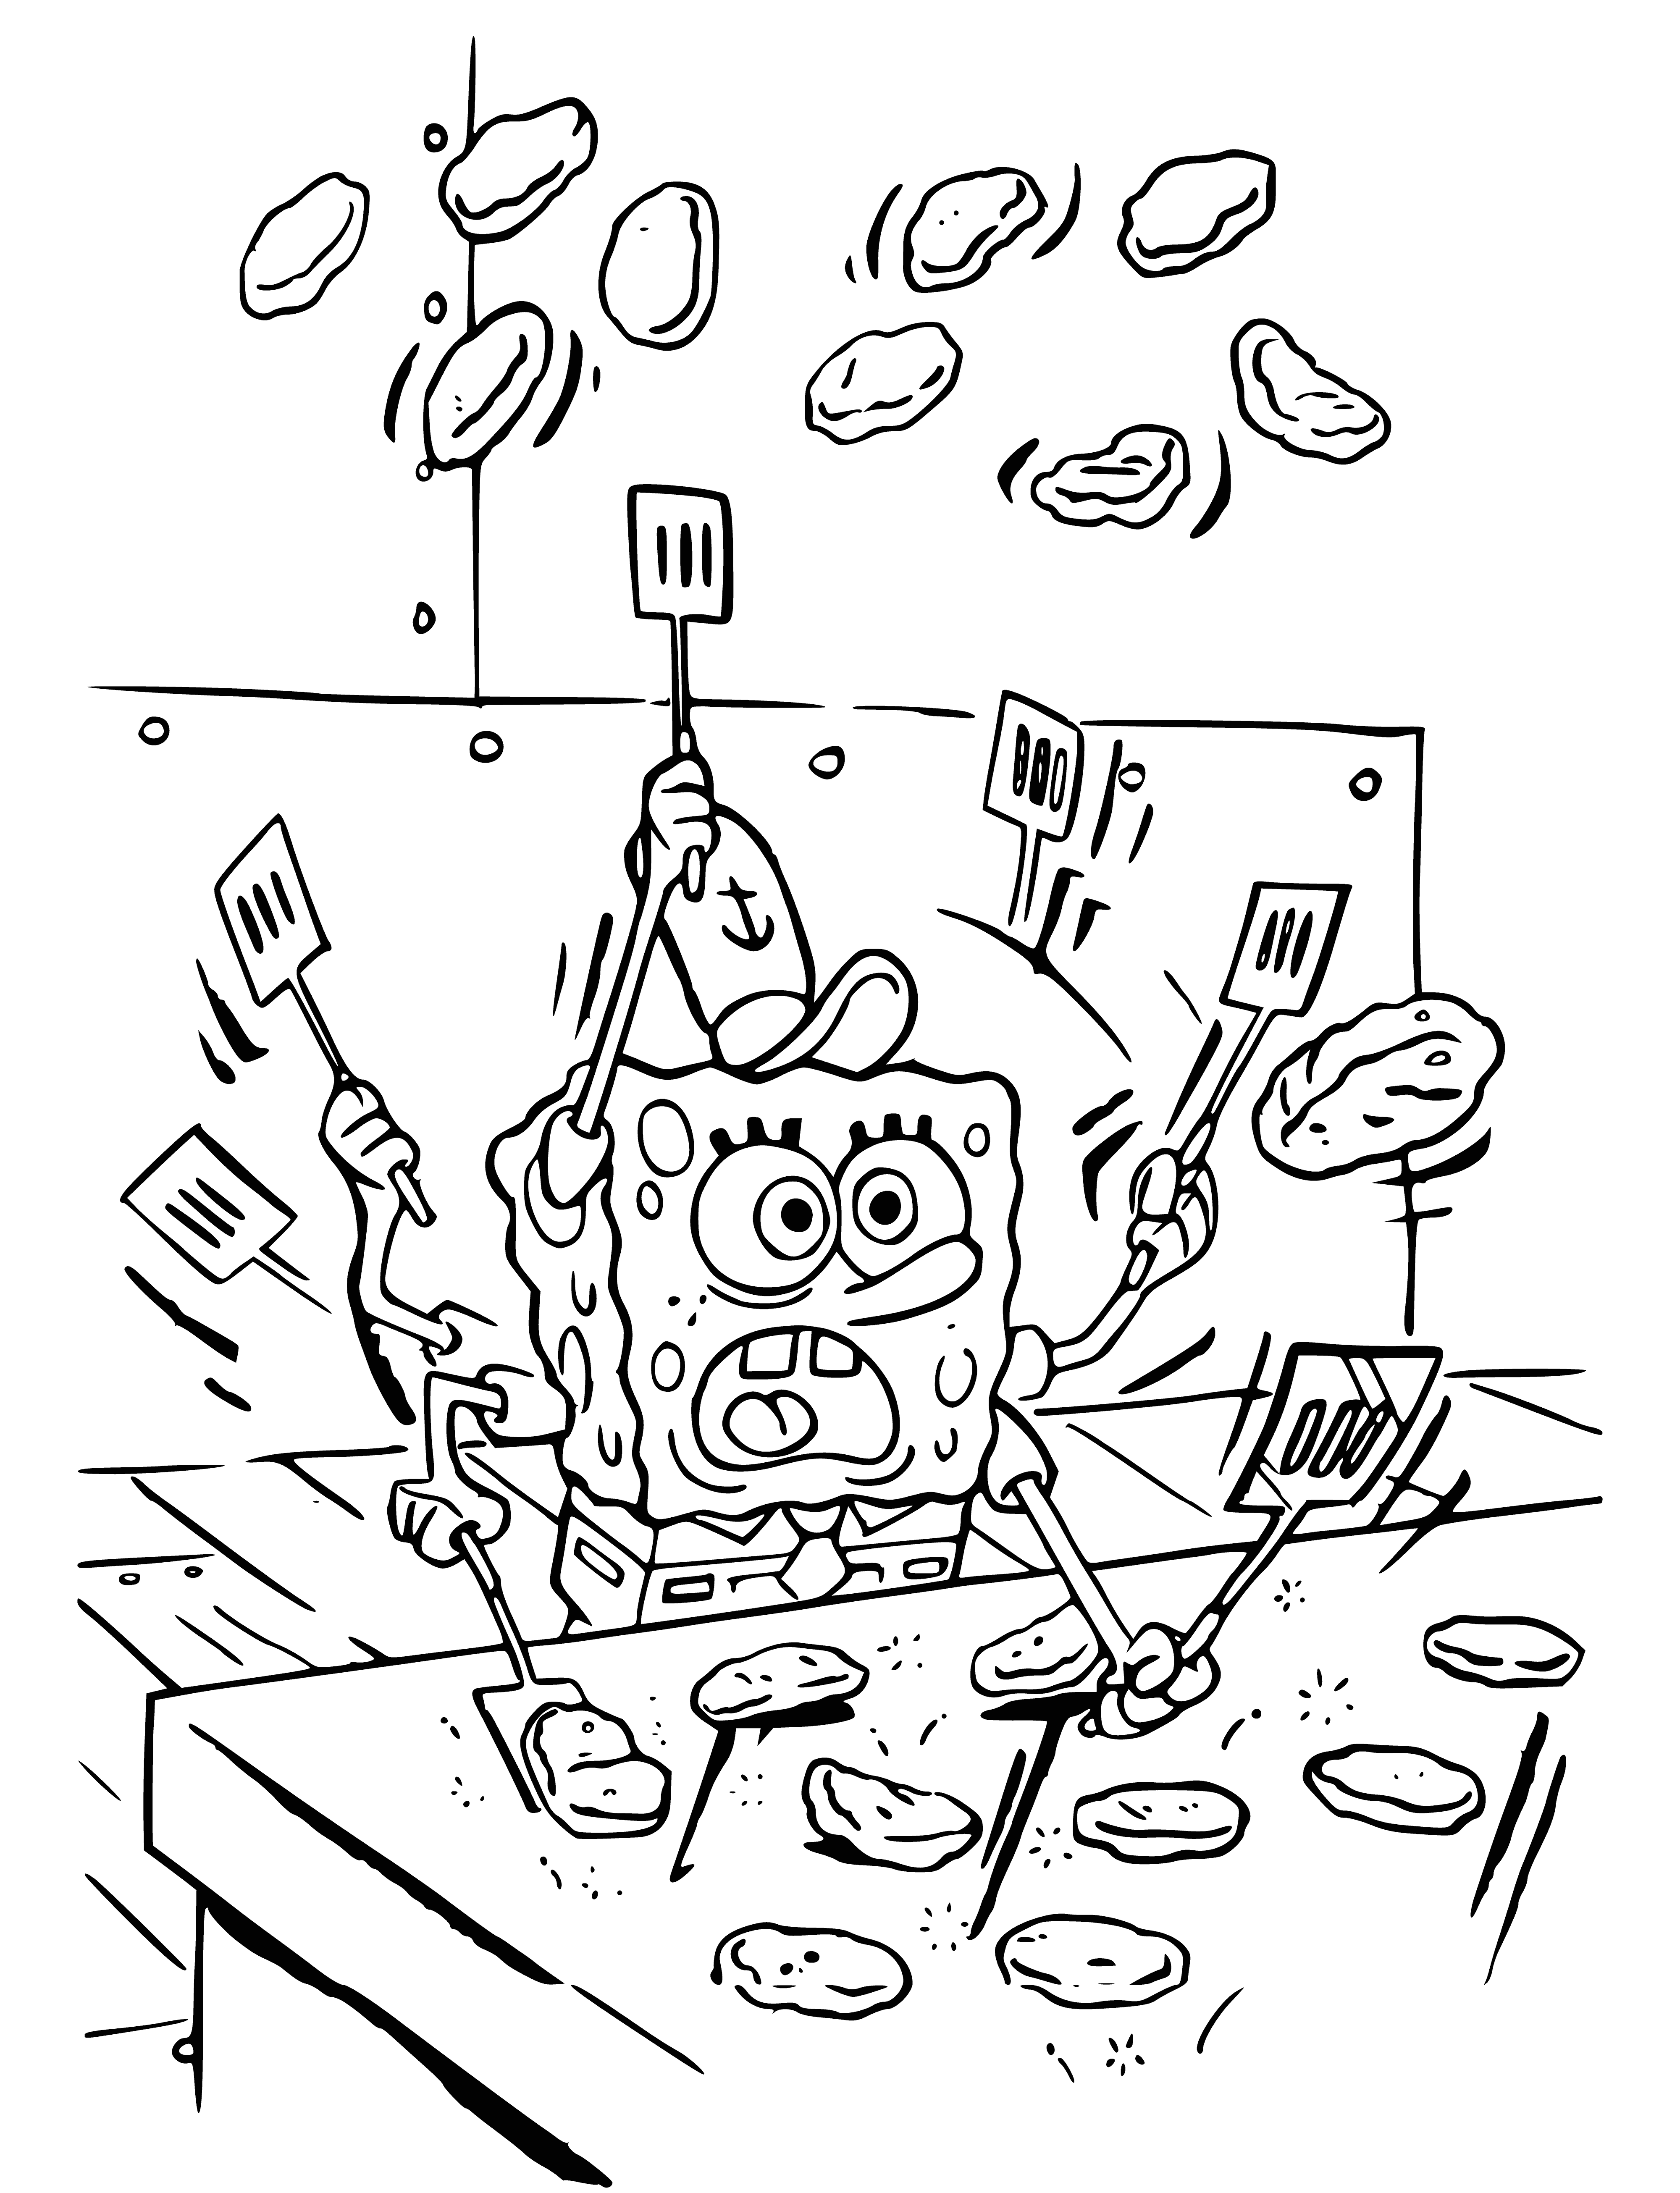 Spongebob at the stove coloring page